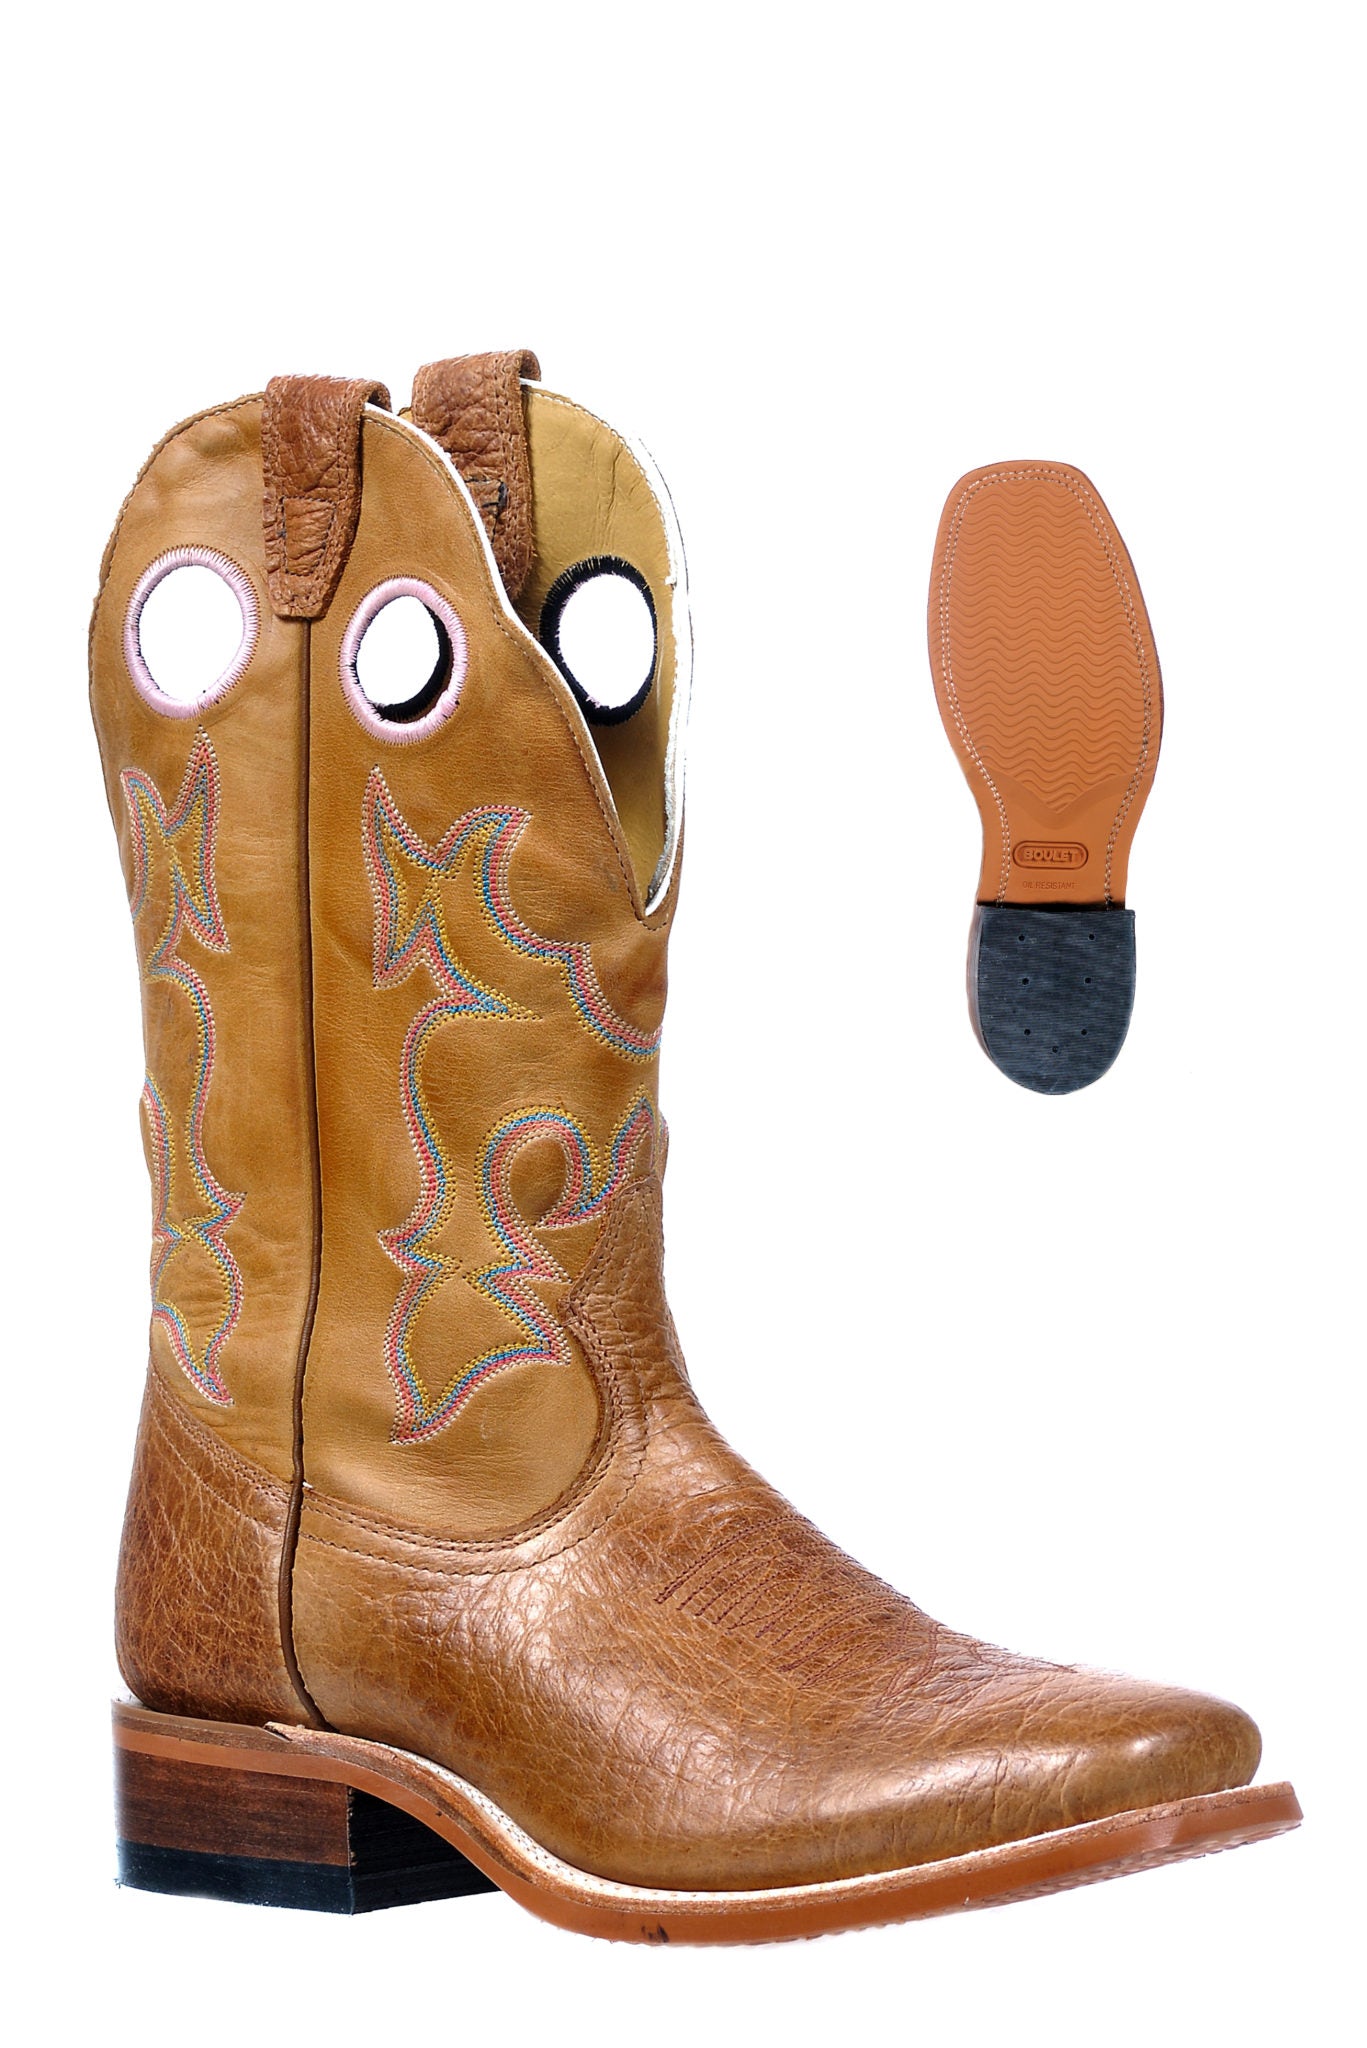 Boot Women's (2918) - 12" Wide Square Toe in Blister Cognac and Wyoming Cognac